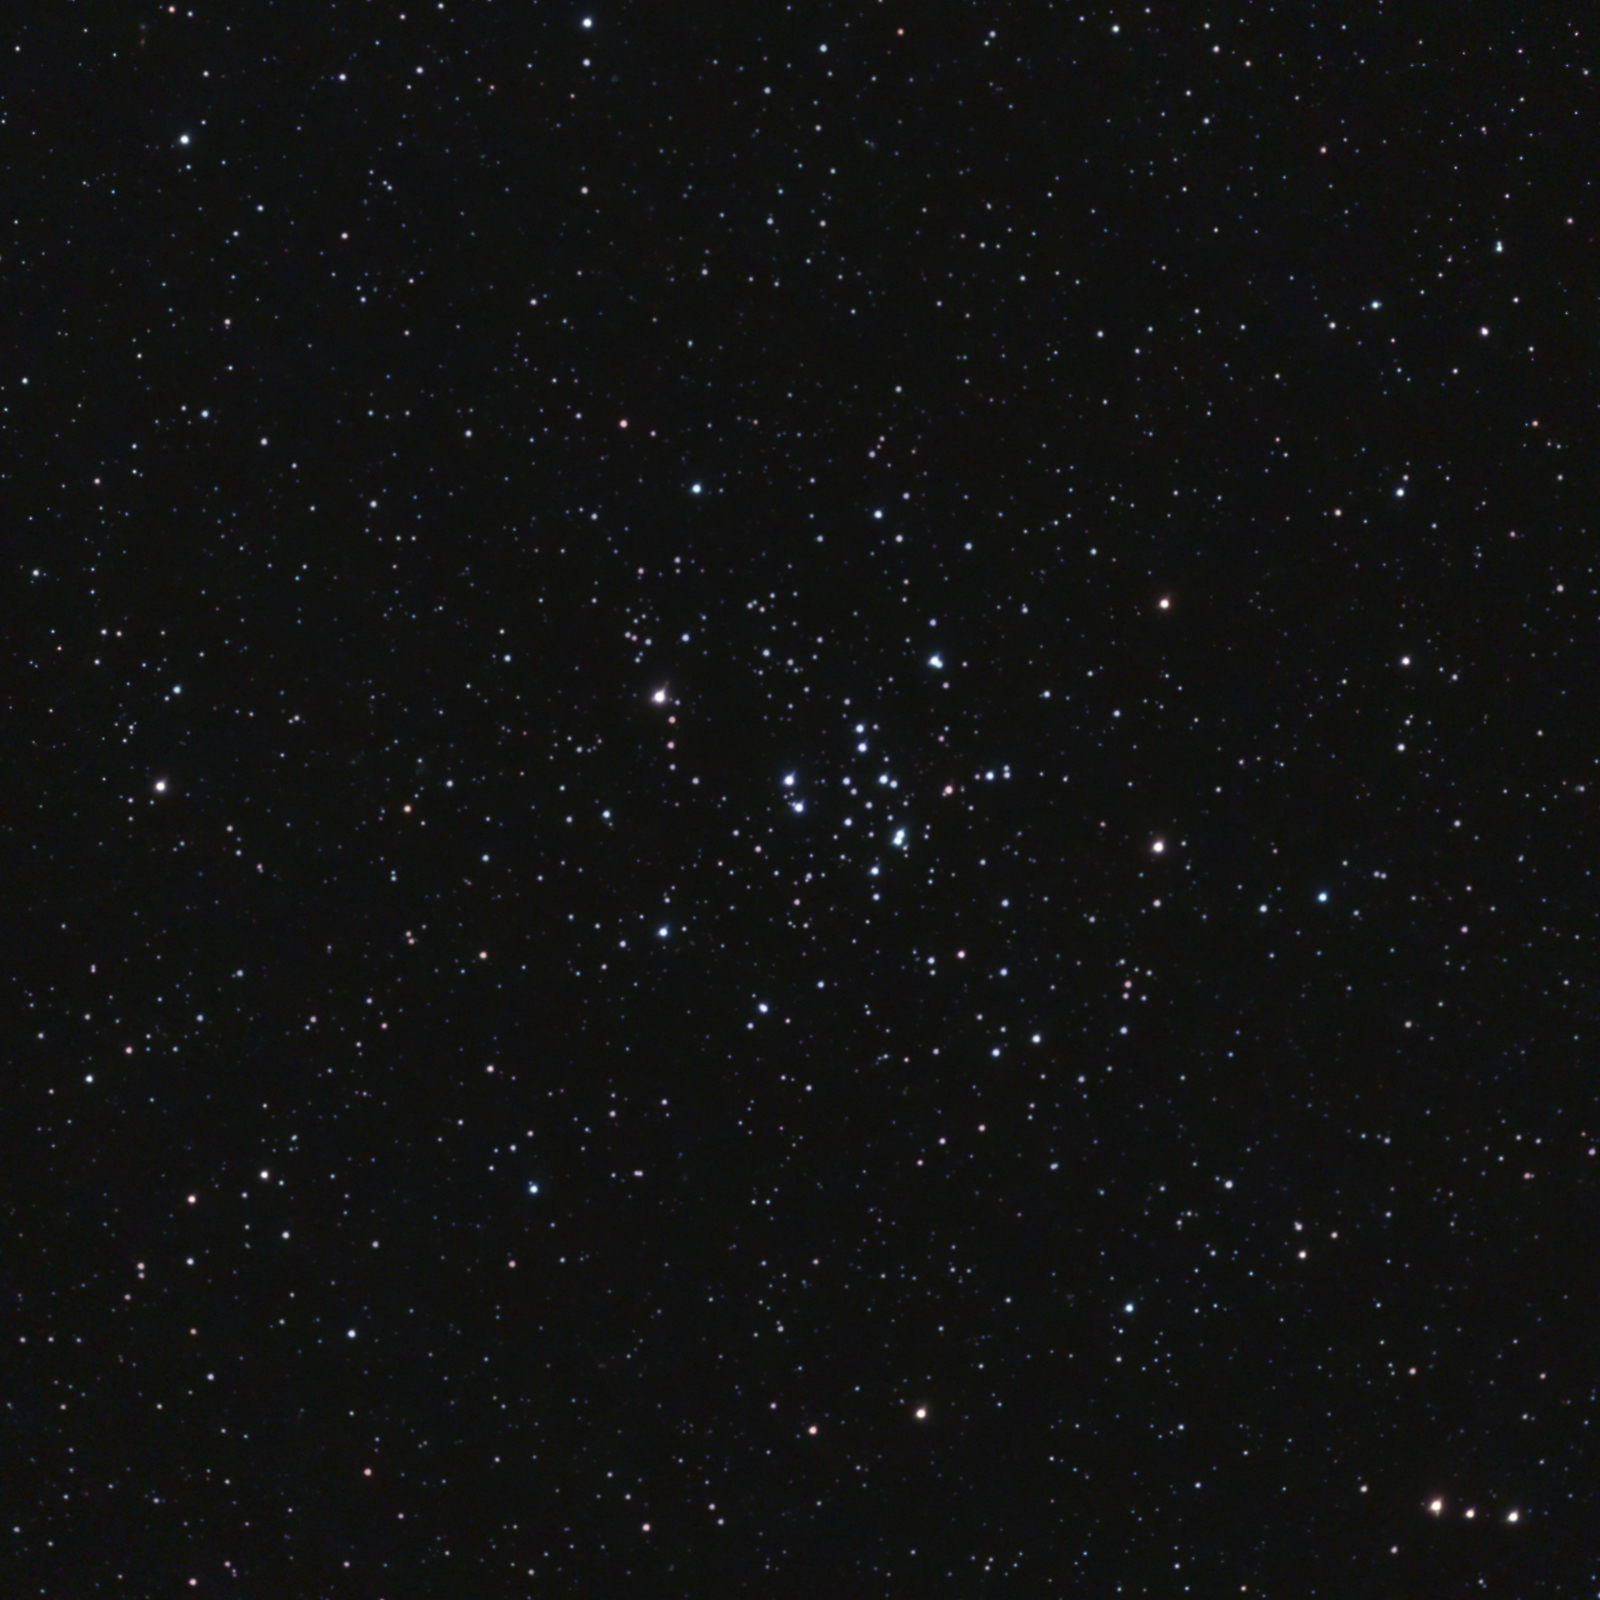 M34 – Open Cluster